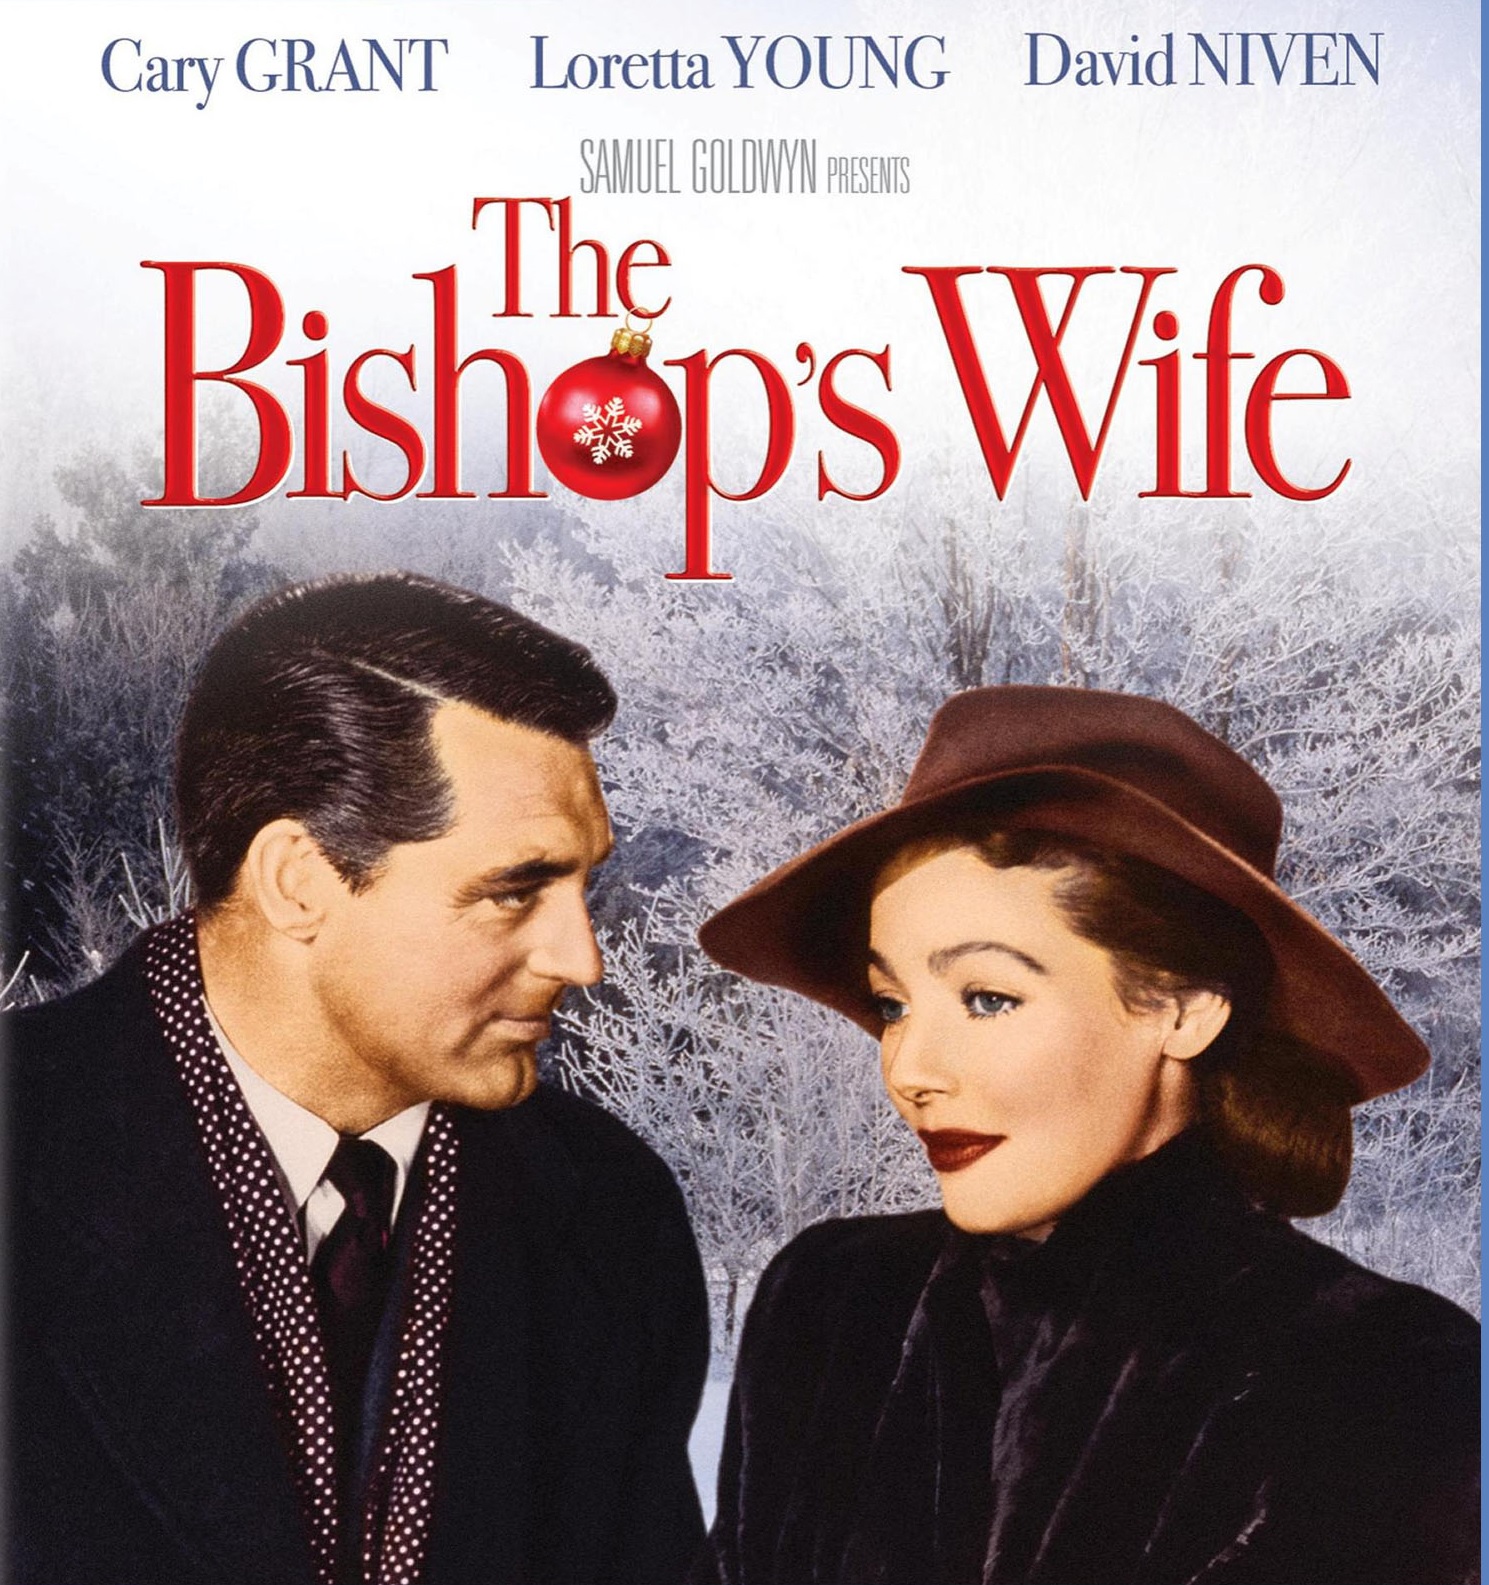 Event Promo Photo For Free Movie-The Bishop's Wife